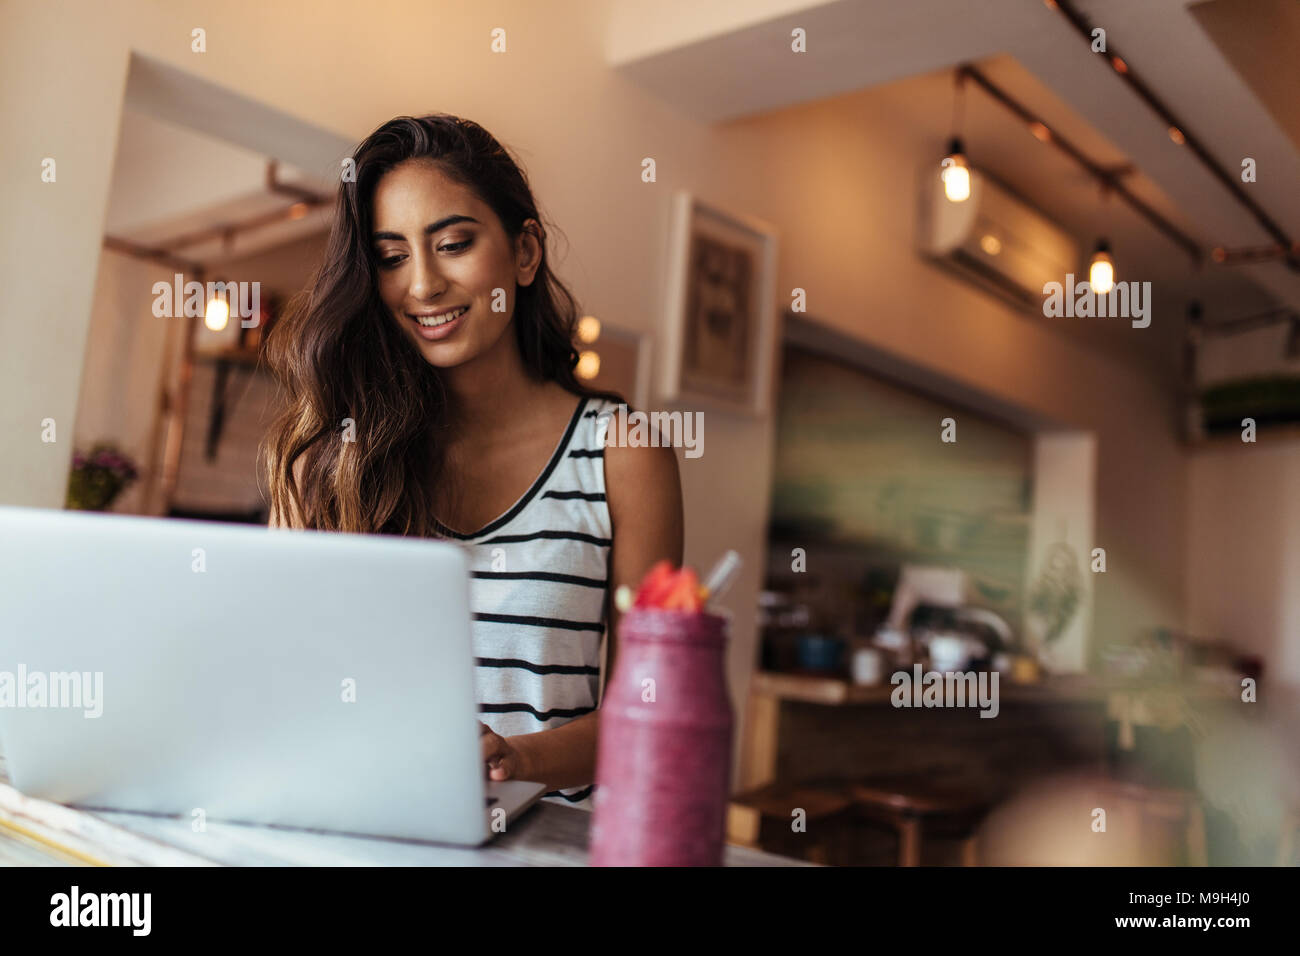 Woman entrepreneur working on laptop computer with a smoothie on the table. Woman enjoying a glass of smoothie while working. Stock Photo